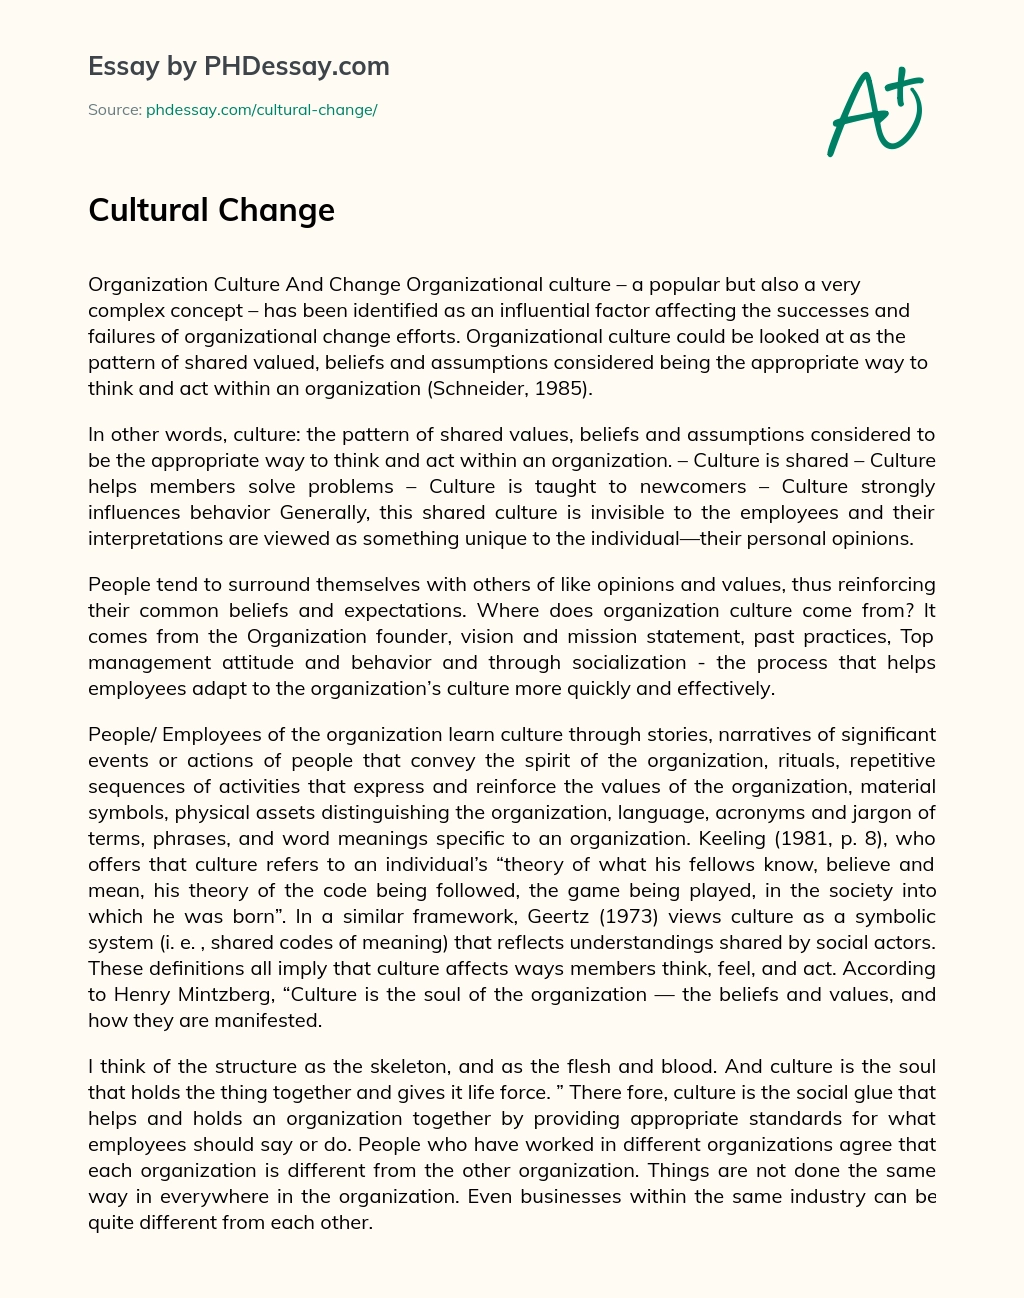 introduction of cultural change essay